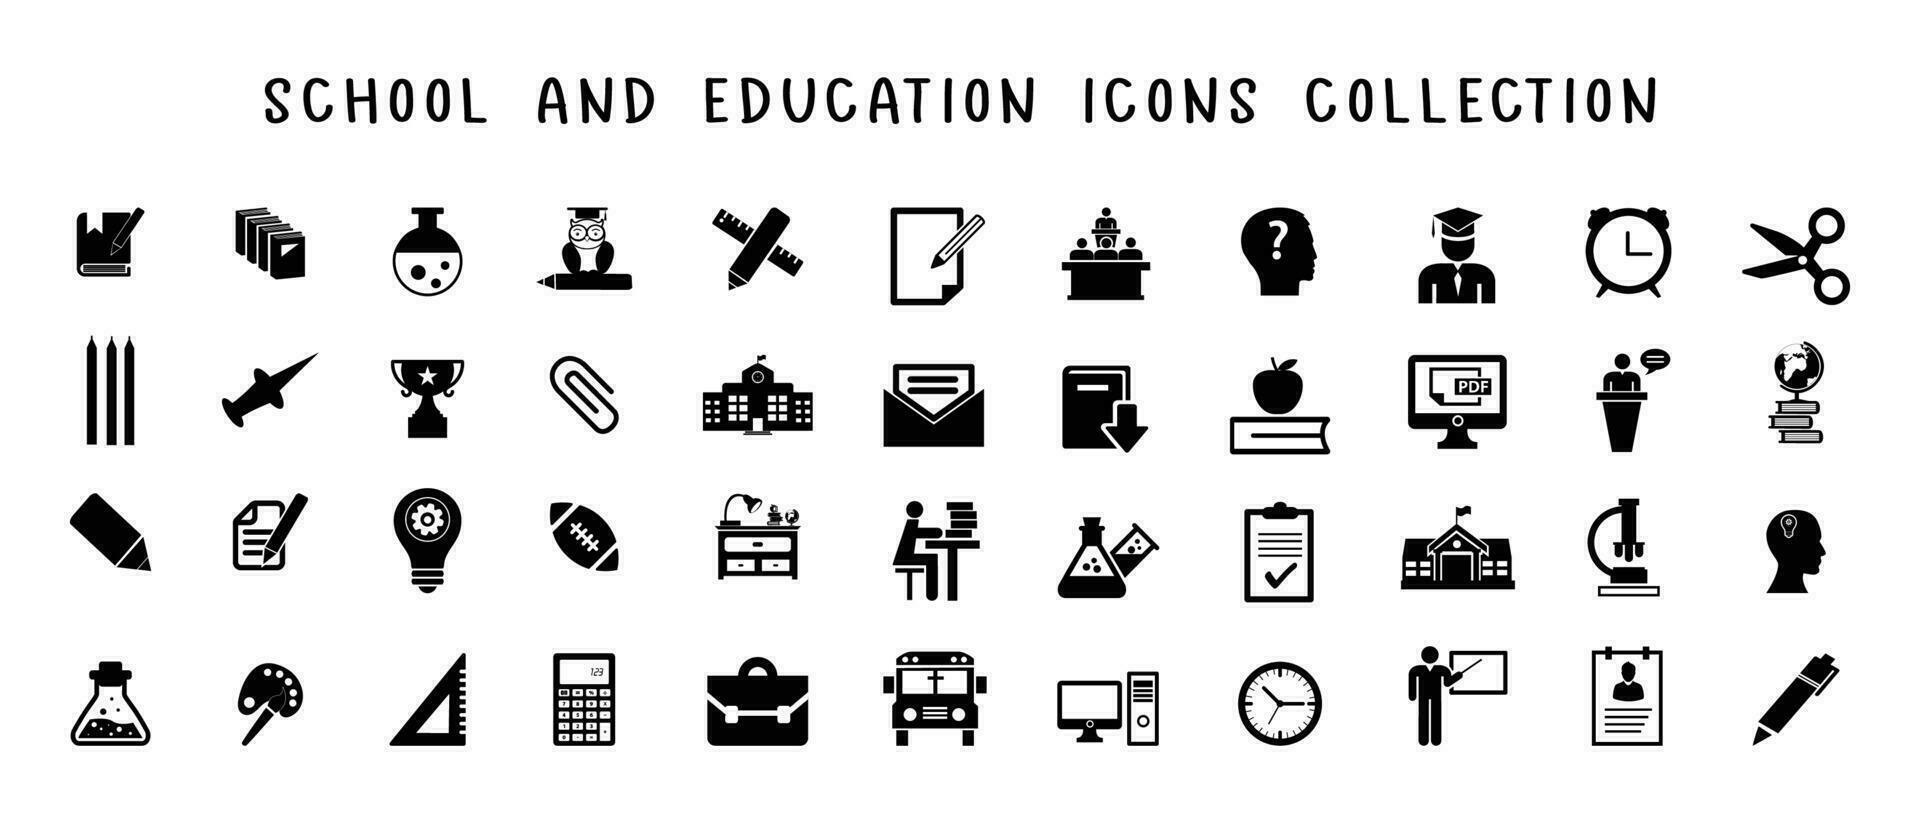 Set of school and education icons. Vector illustration of school equipments